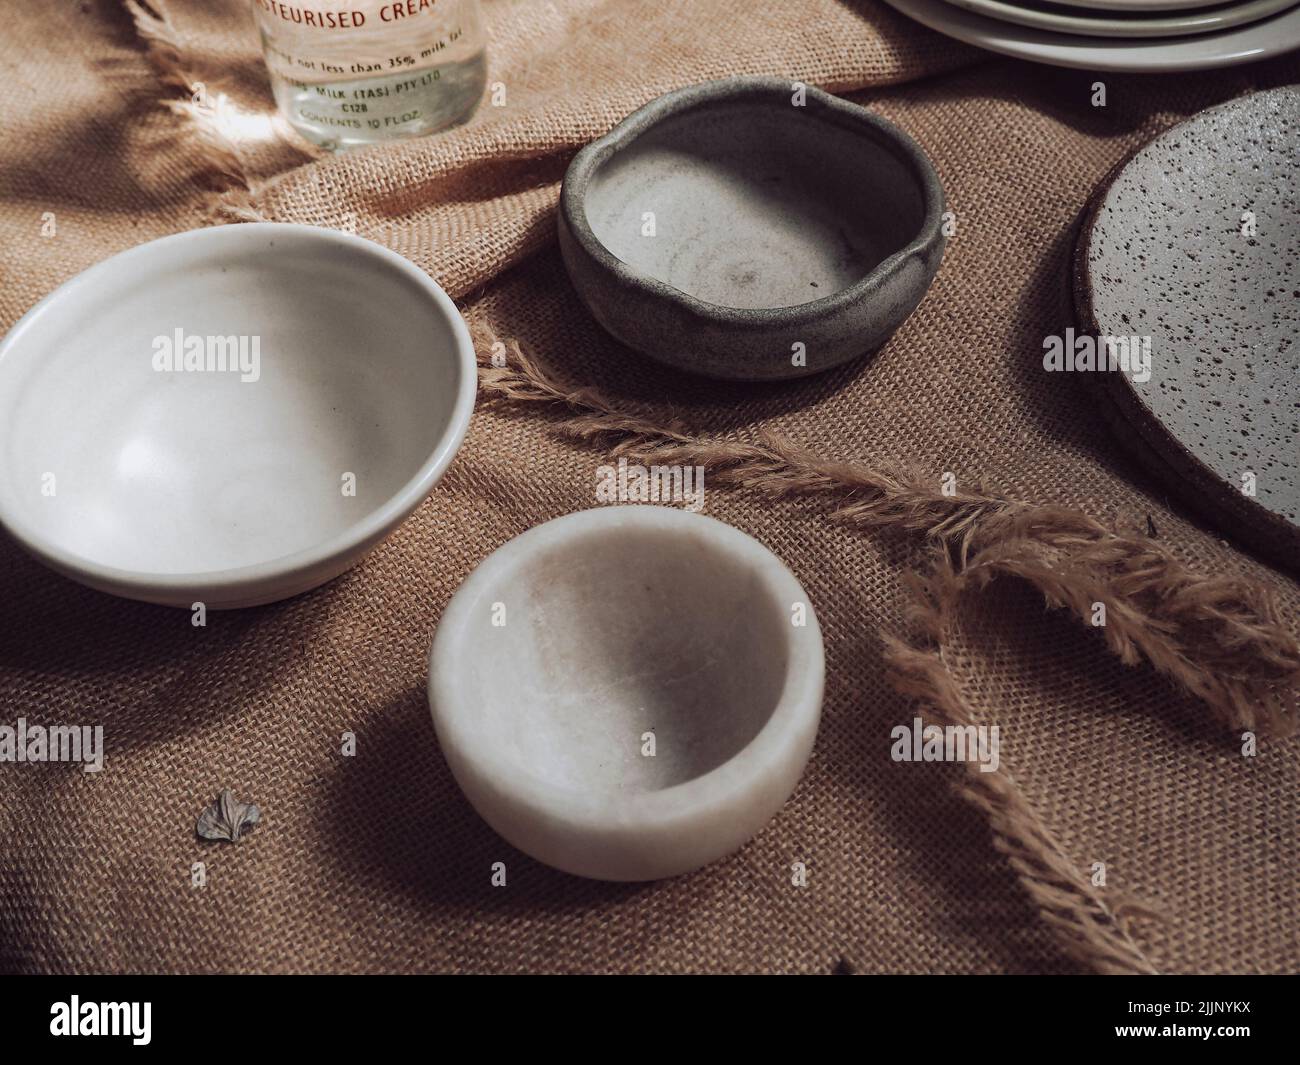 The rustic homely kitchenware with muted colors Stock Photo